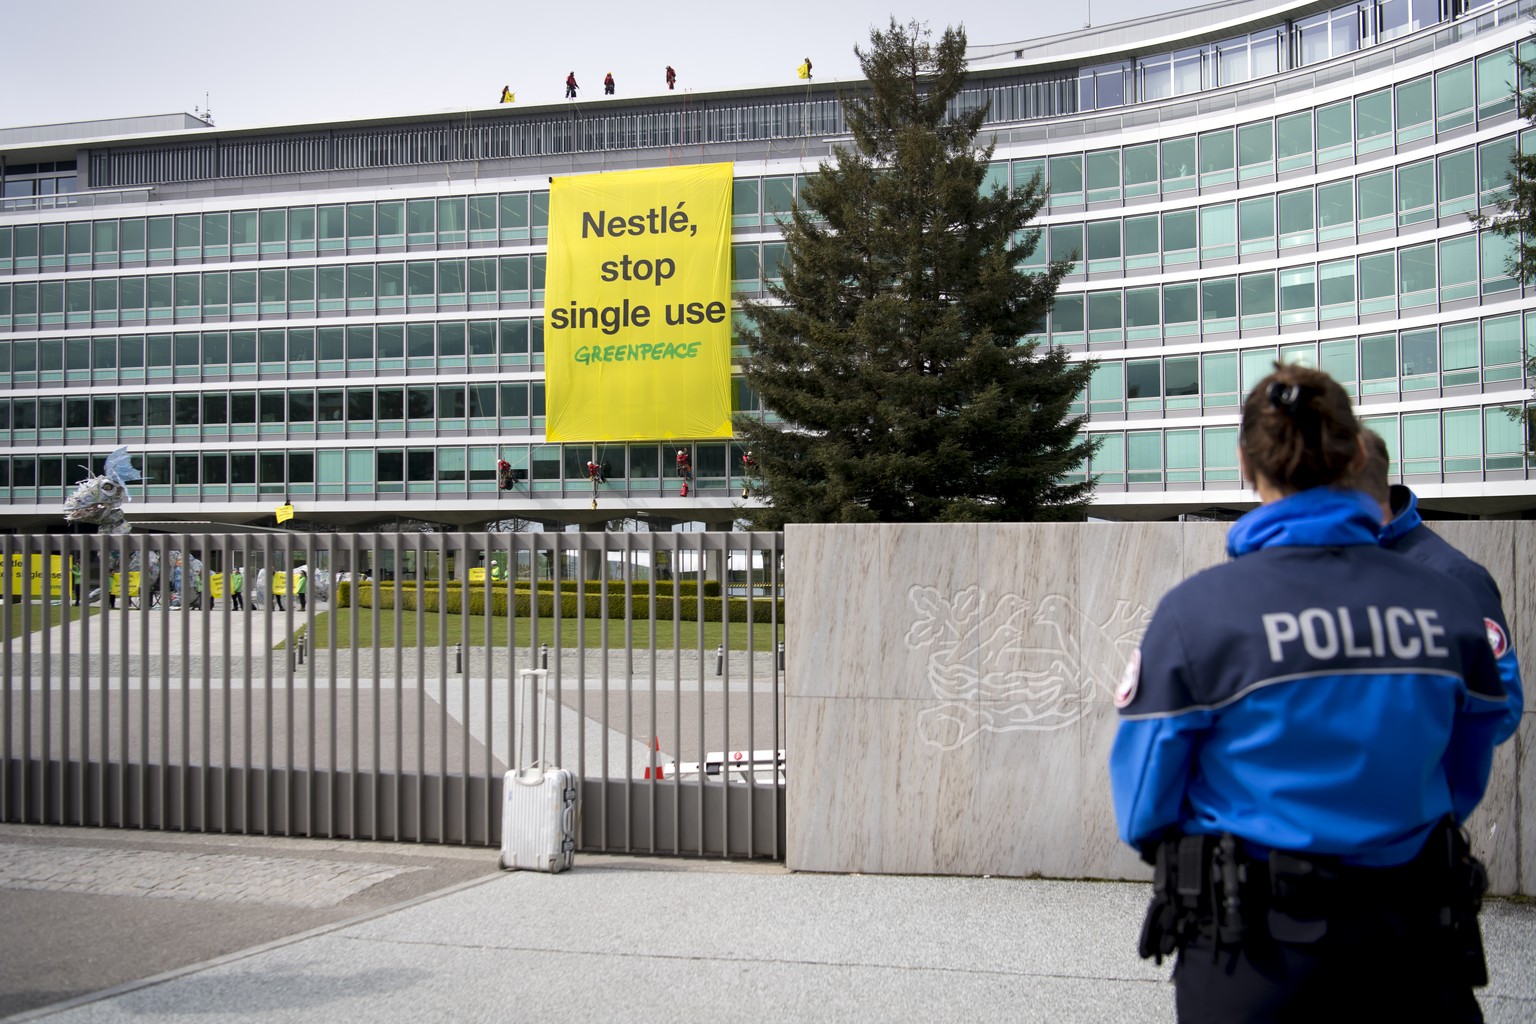 Greenpeace activists bring back to food and drinks giant Nestle a huge monster made of plastic recovered at sea and on the beaches by Greenpeace in front of the Nestle&#039;s headquarter in Vevey, Swi ...